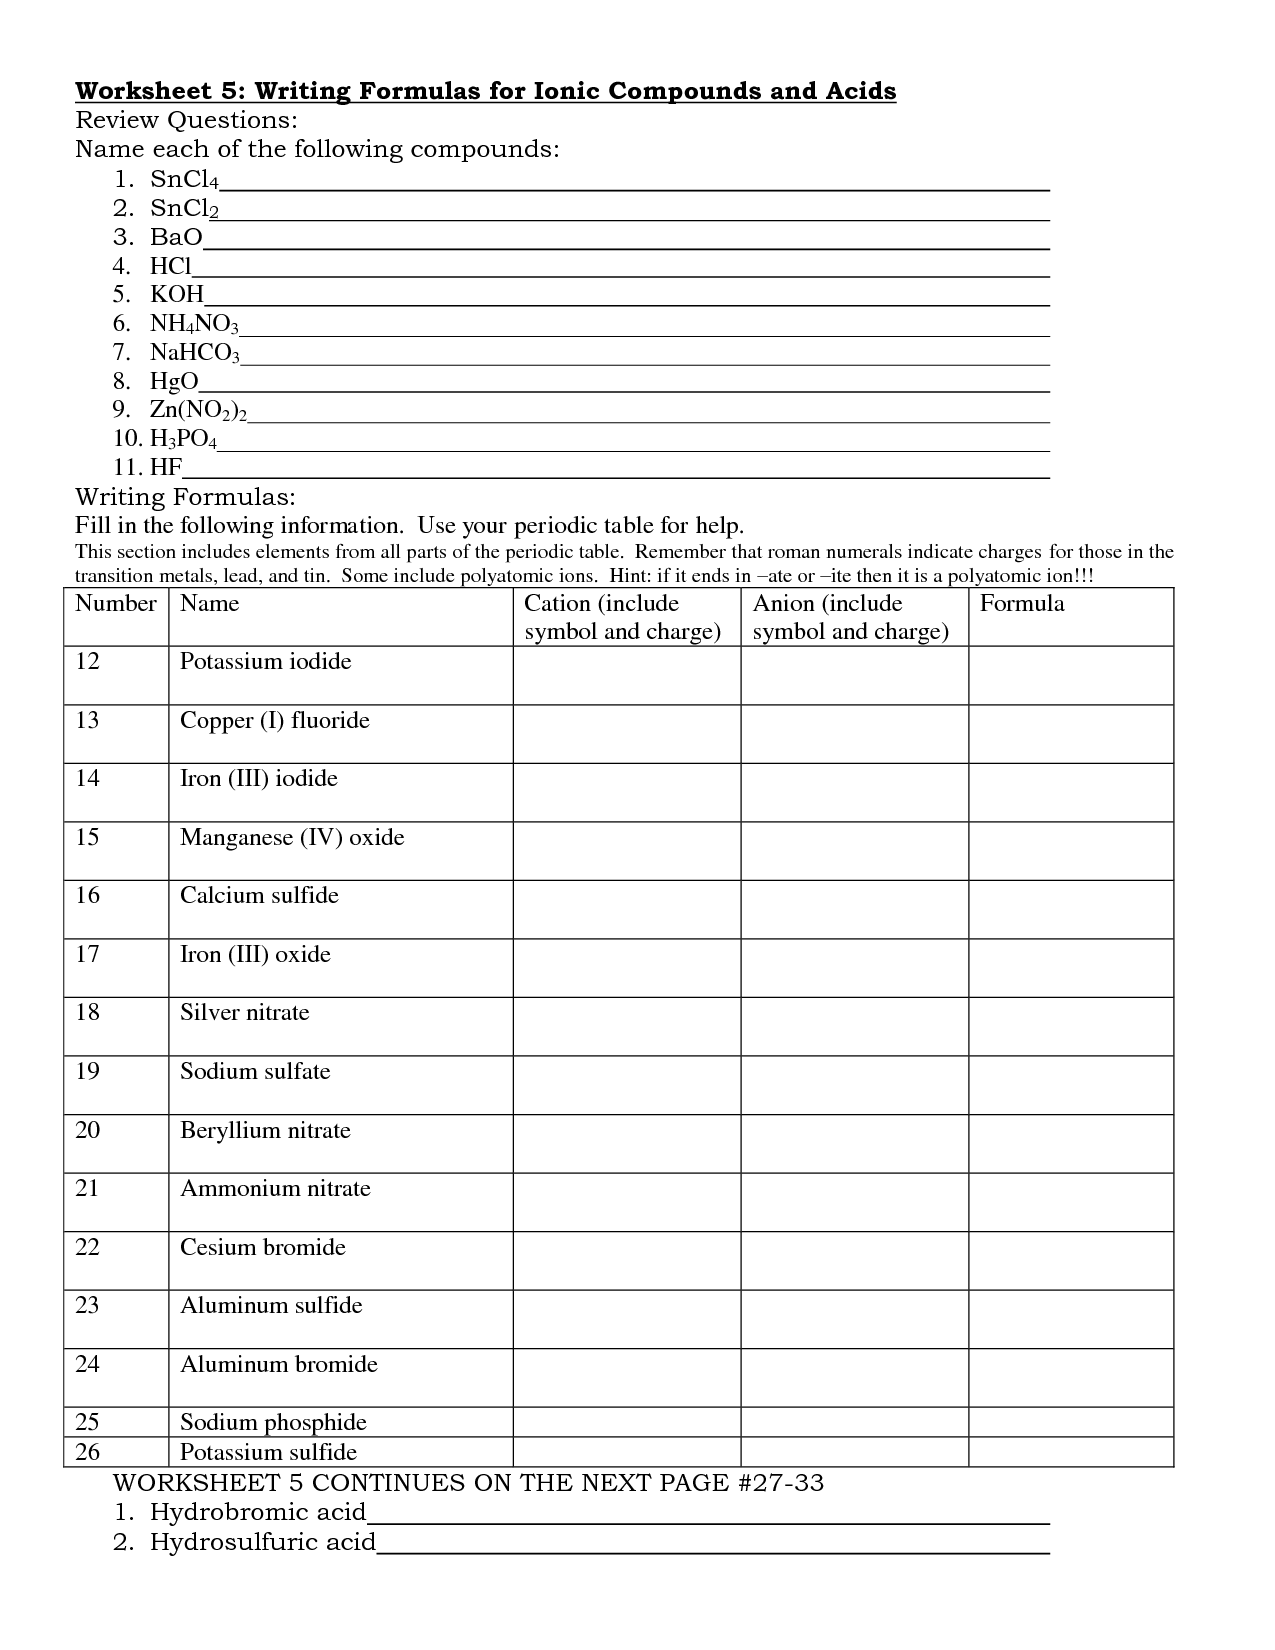 13-best-images-of-writing-binary-ionic-compounds-worksheet-writing